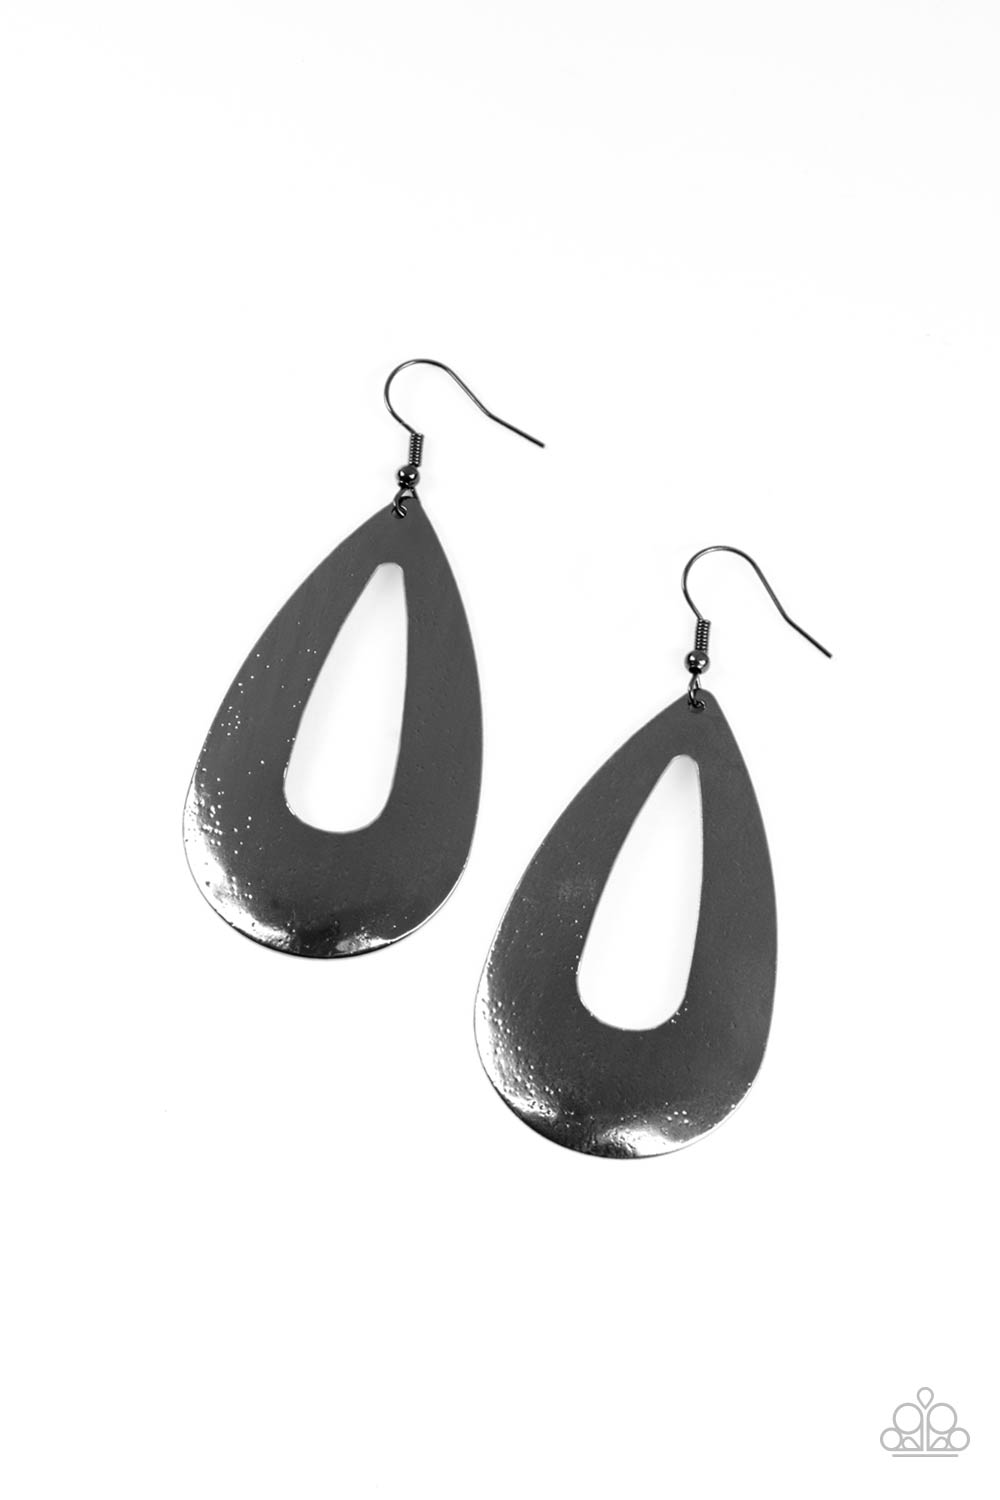 Paparazzi Hand It OVAL! - Black Earrings - A Finishing Touch Jewelry